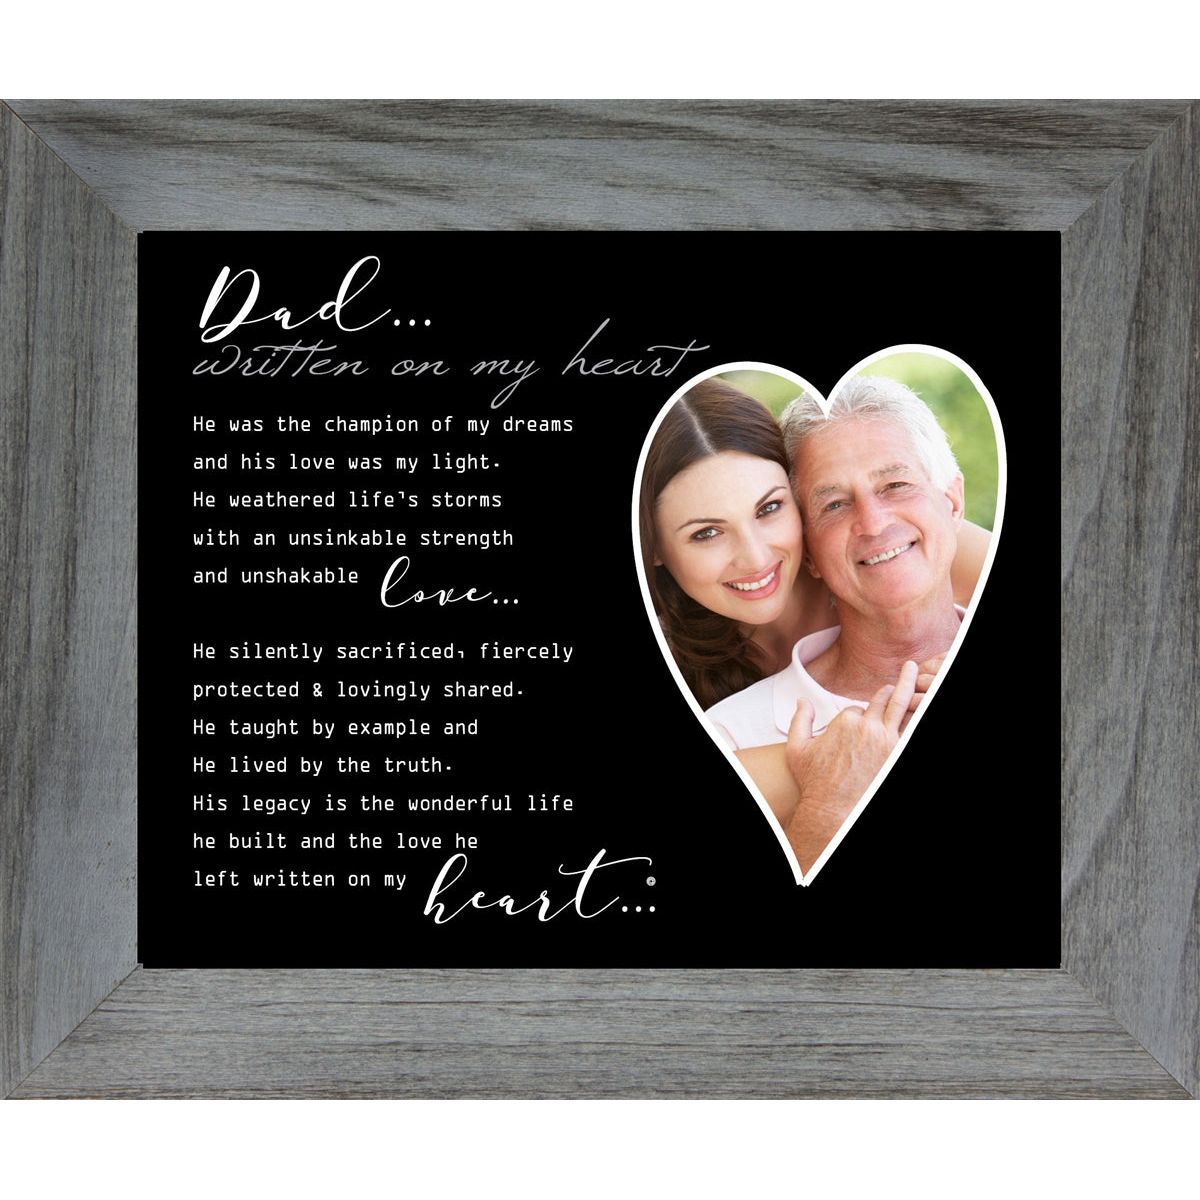 8x10 Distressed Gray wood frame with "Dad... Written on My Heart"  poem and a heart shaped opening for a photograph.